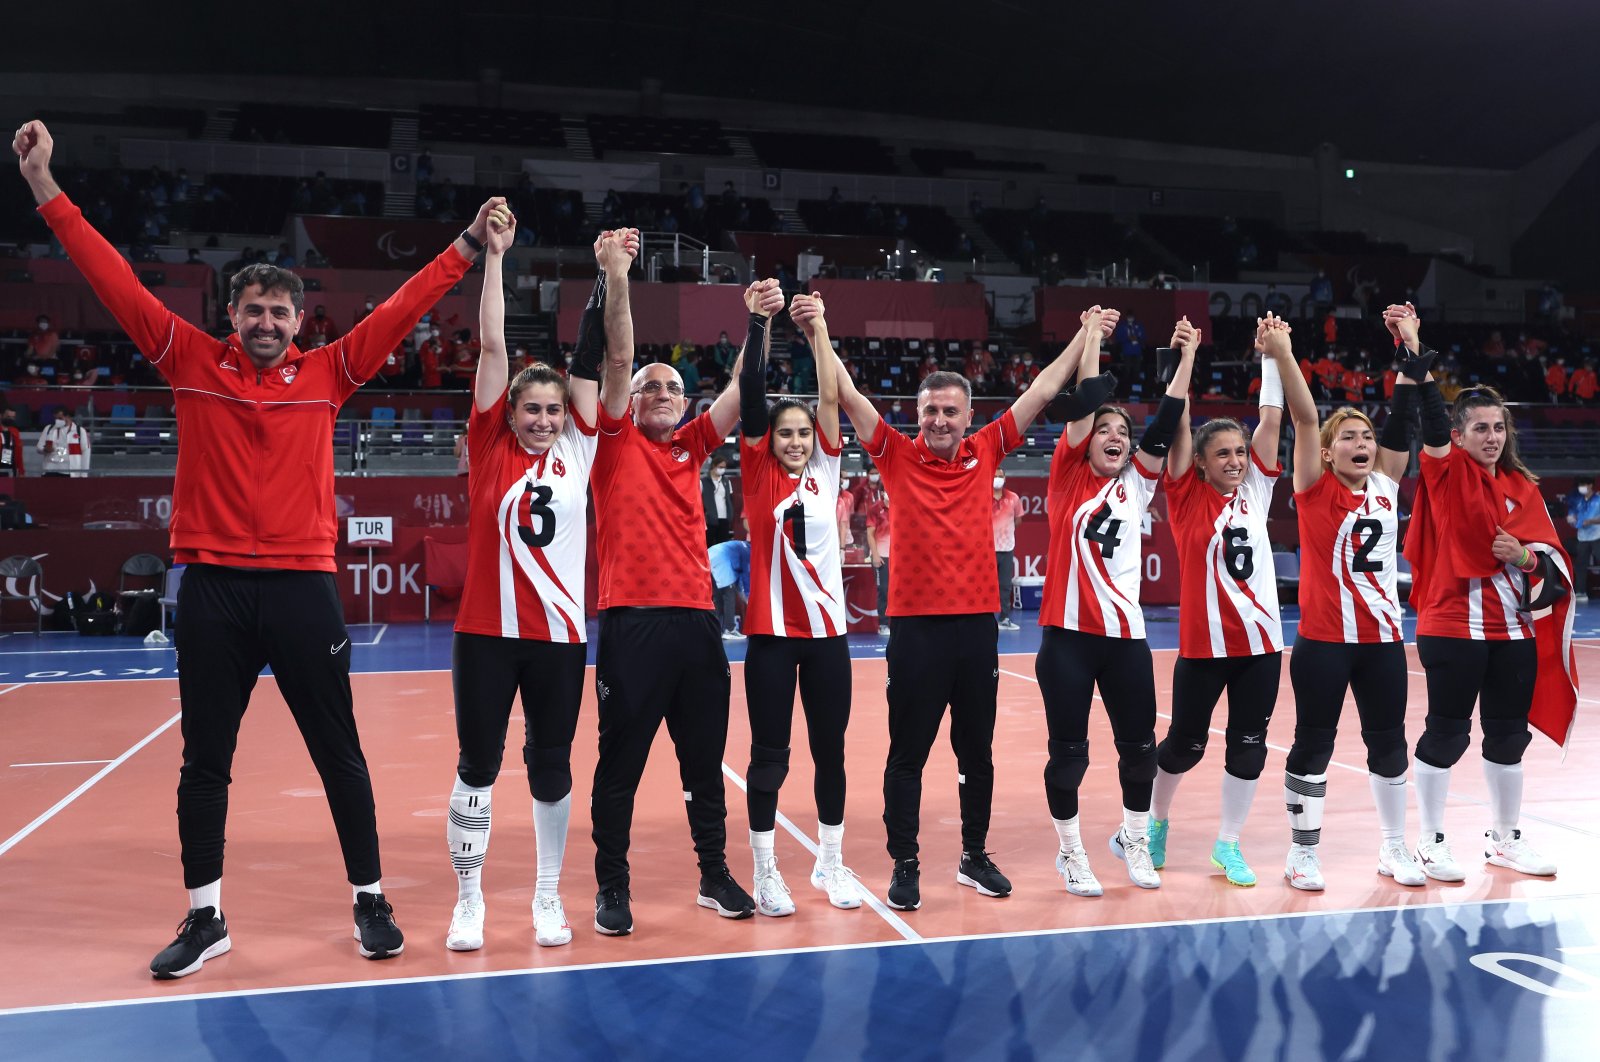 Team Turkey celebrates after defeating Team USA in the women's in the Tokyo Paralympic goalball final at Makuhari Messe Hall, in Chiba, Japan, Sept. 3, 2021. (Getty Images)